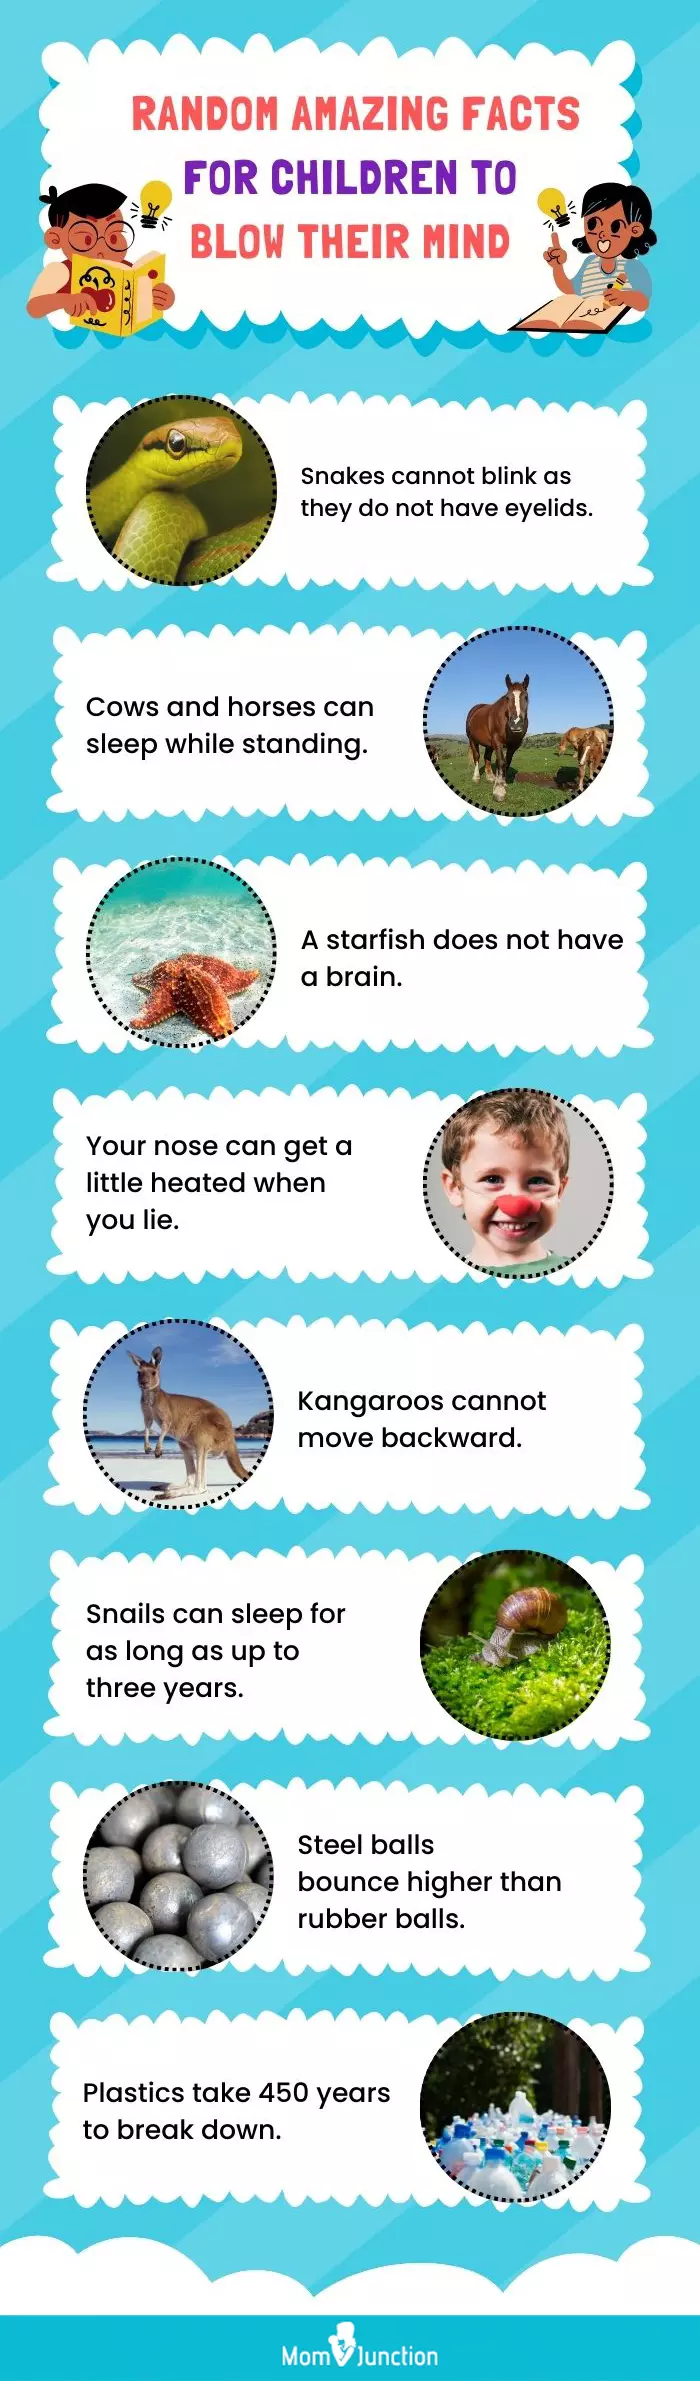 random hilarious facts for children to blow their mind (infographic)